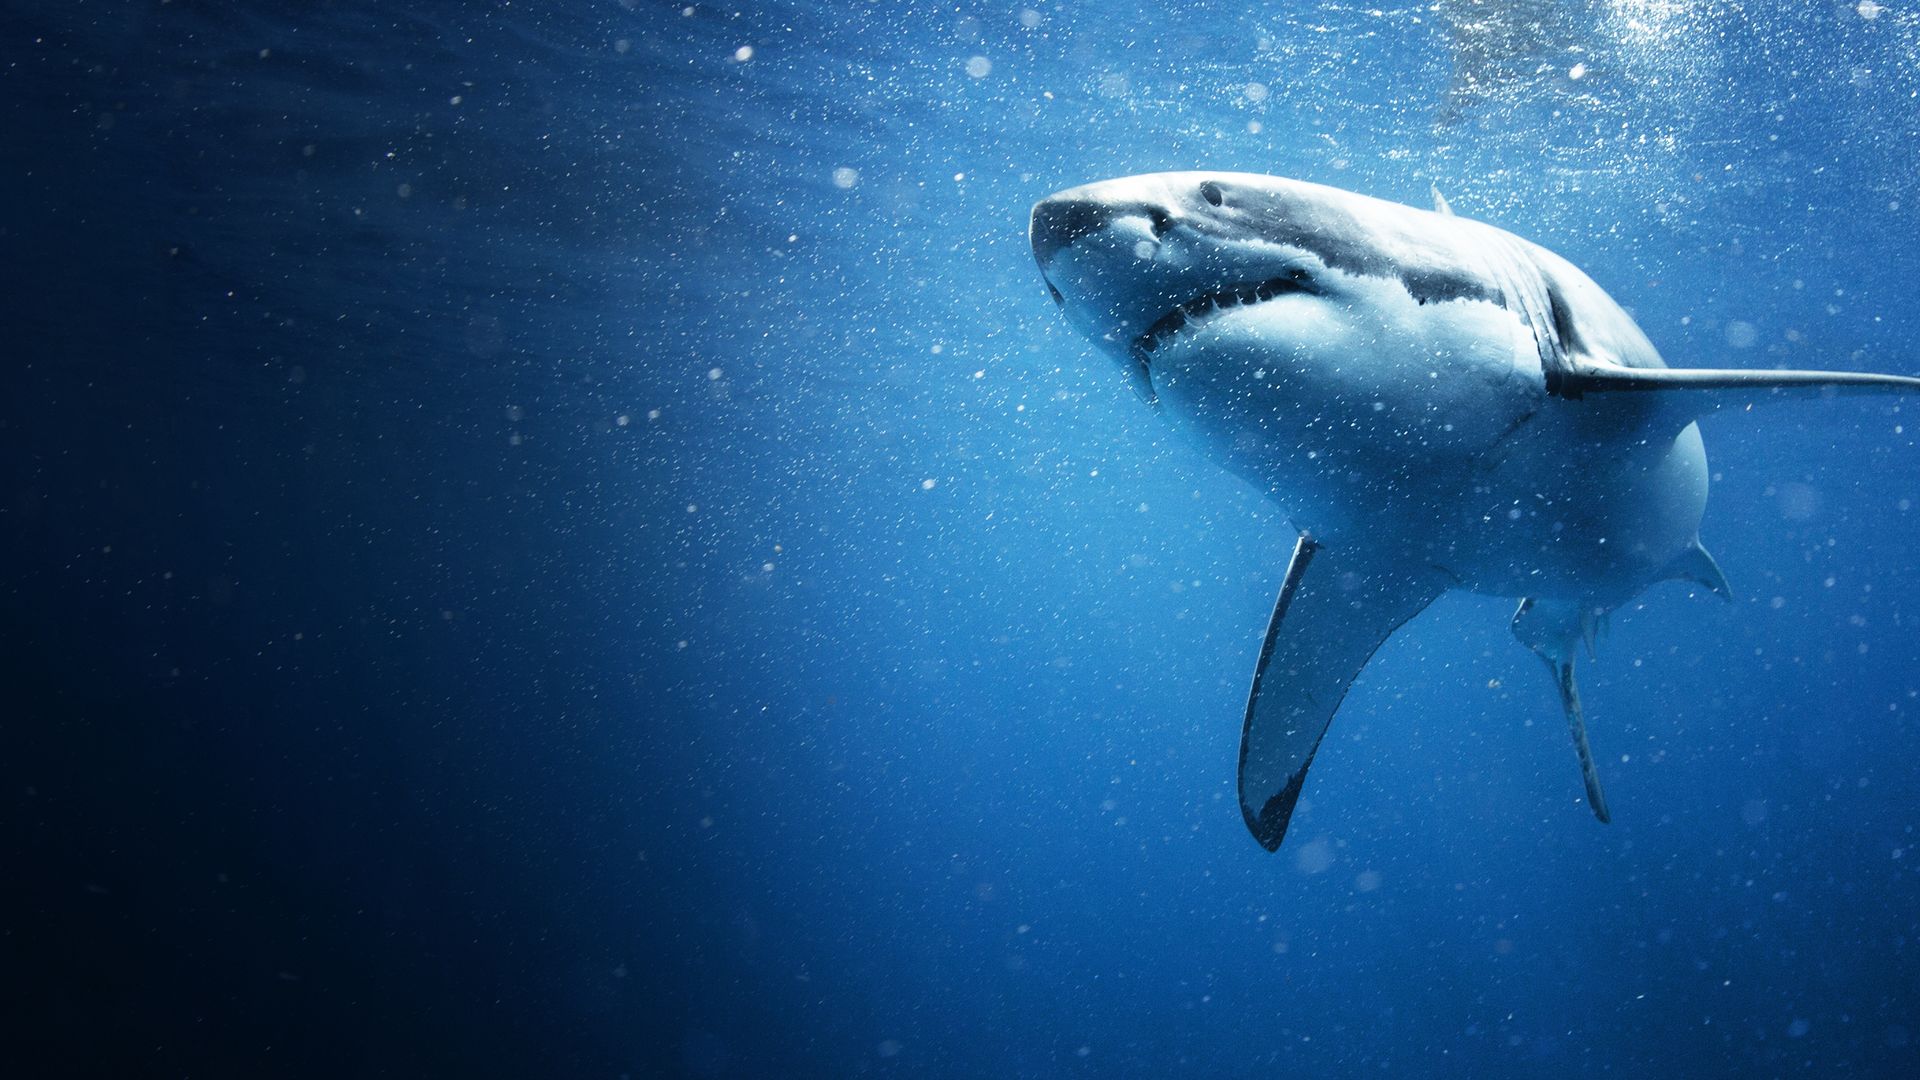 Diving With Sharks: The Ultimate Guide